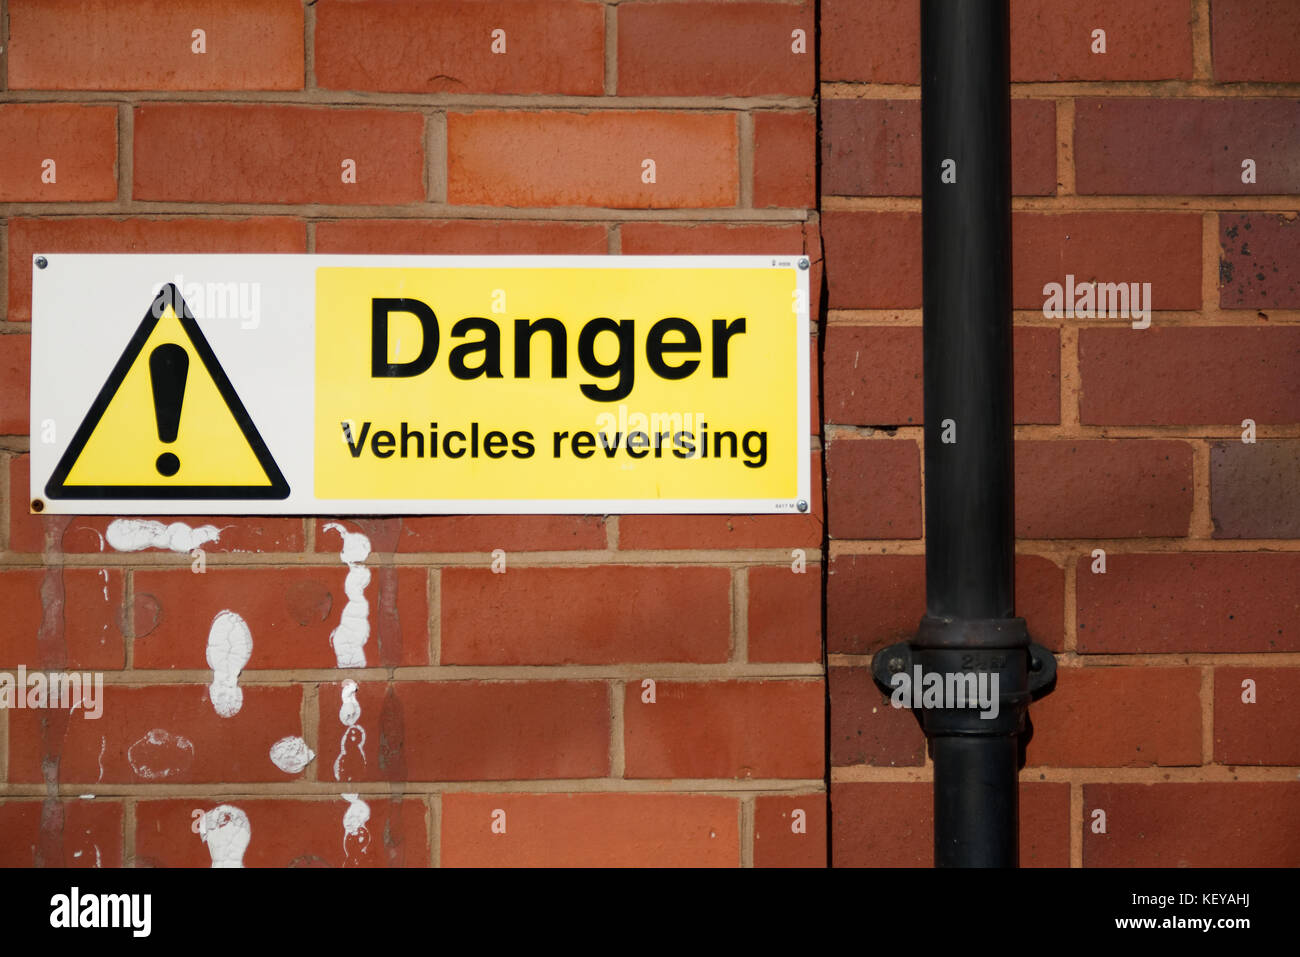 Danger vehicles reversing sign on red brick wall on the right hand side of the image Stock Photo